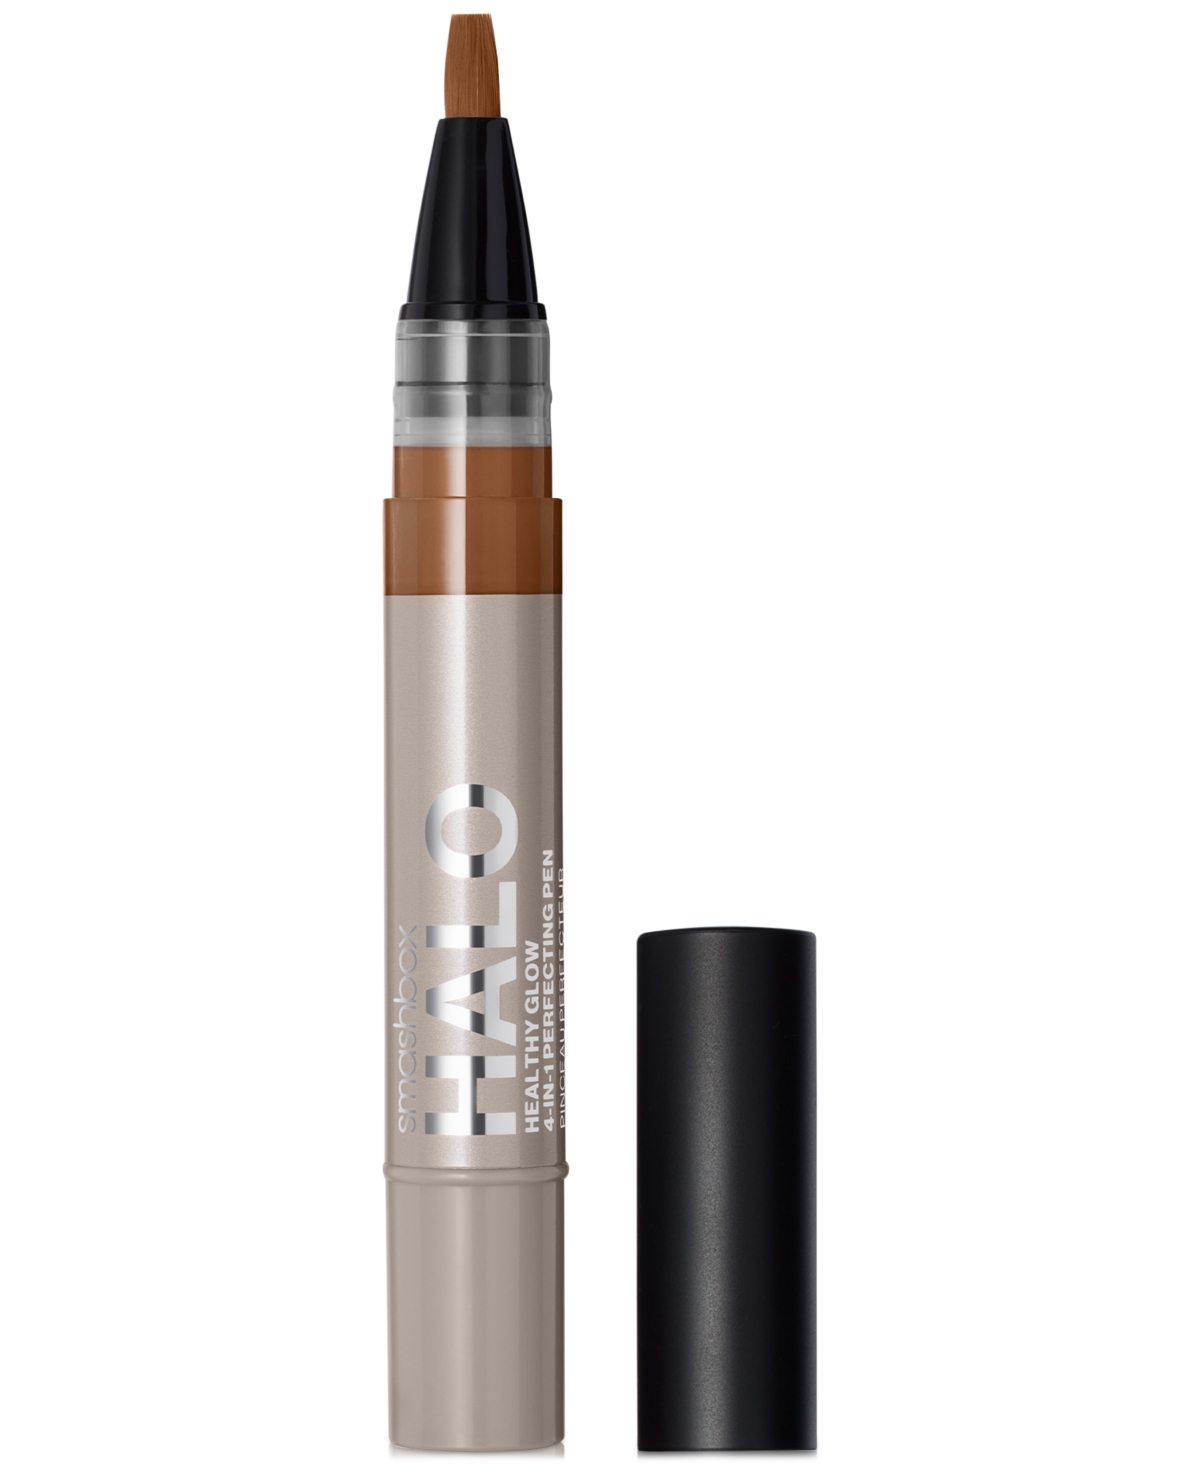 Smashbox Halo Healthy Glow 4-in-1 Perfecting Pen In T-n (level-one Tan With A Neutral Undert